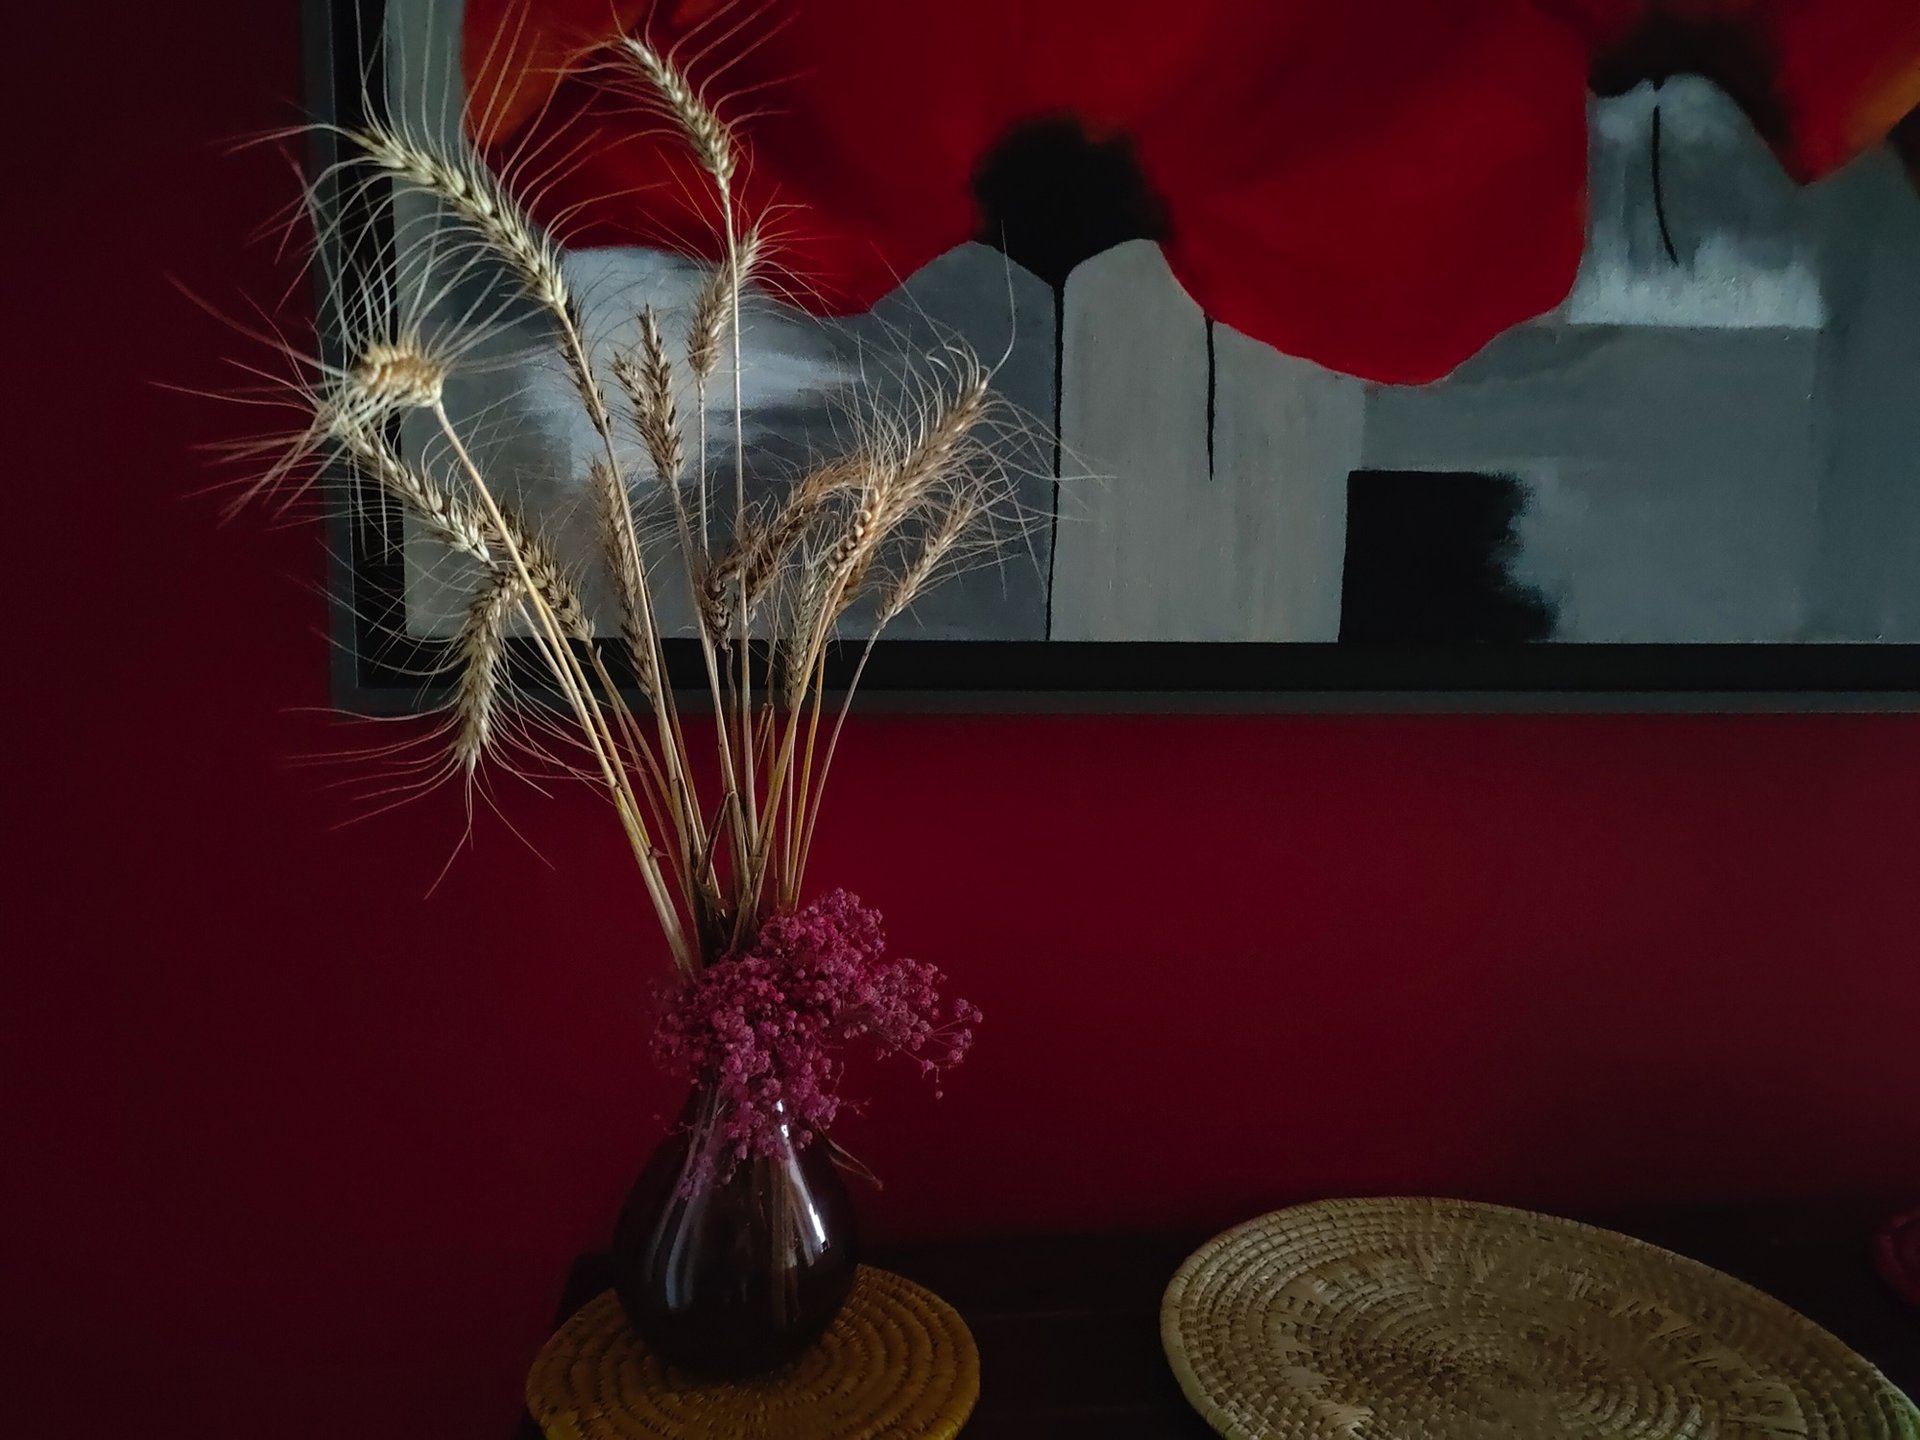 Realme gt2 pro camera sample low light without night mode of a vase with dried flowers on a table.